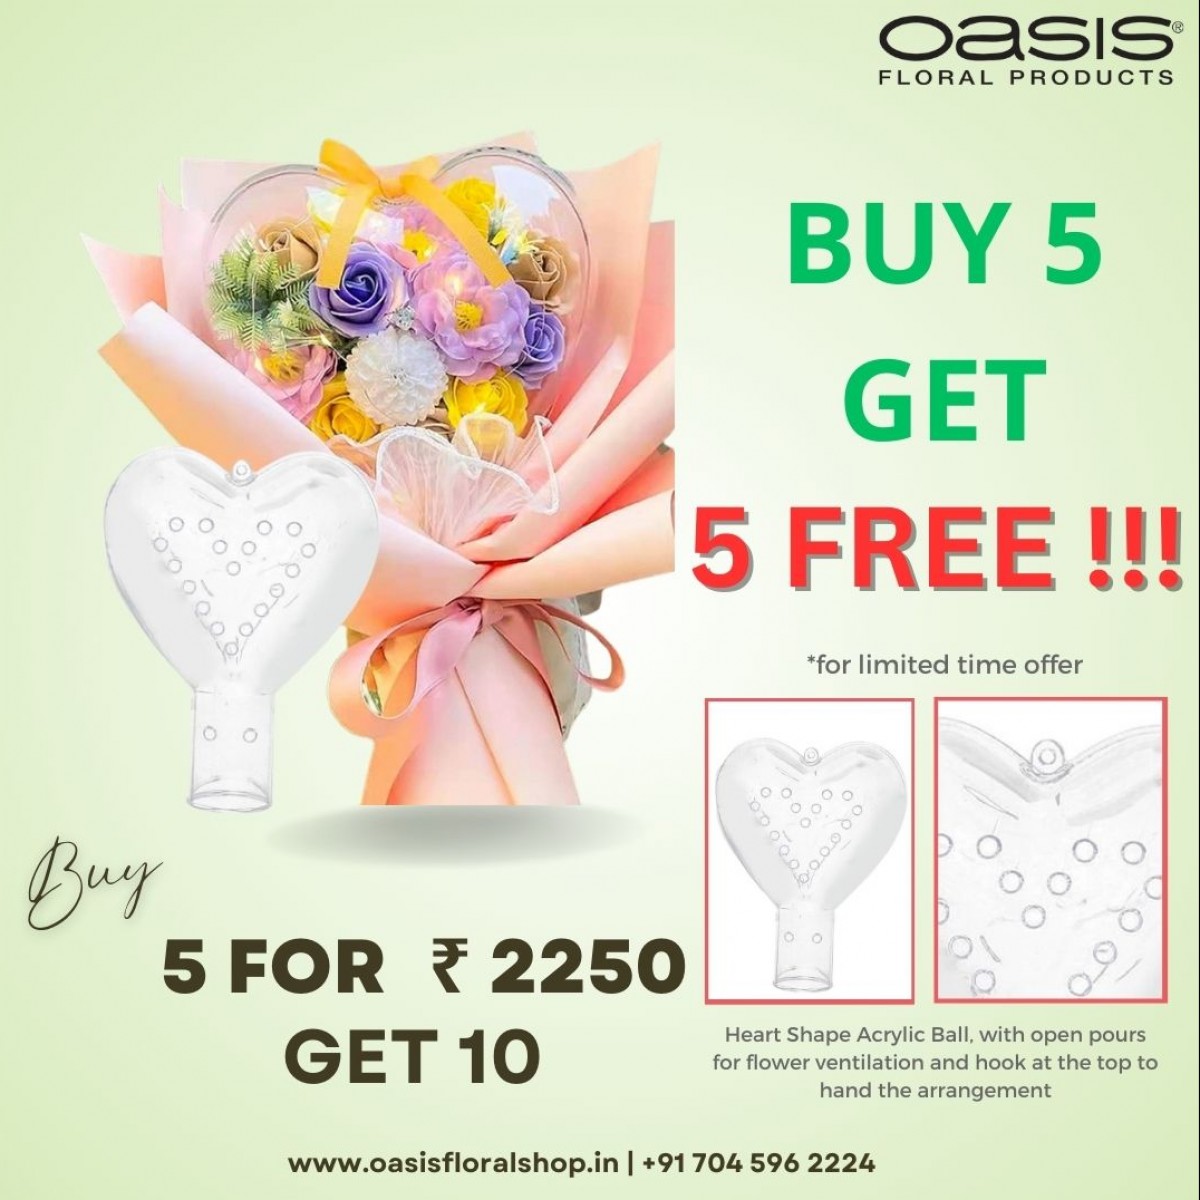 5151 Acrylic Heart Ball Clear (Buy 5 & Get 5 FREE sets)